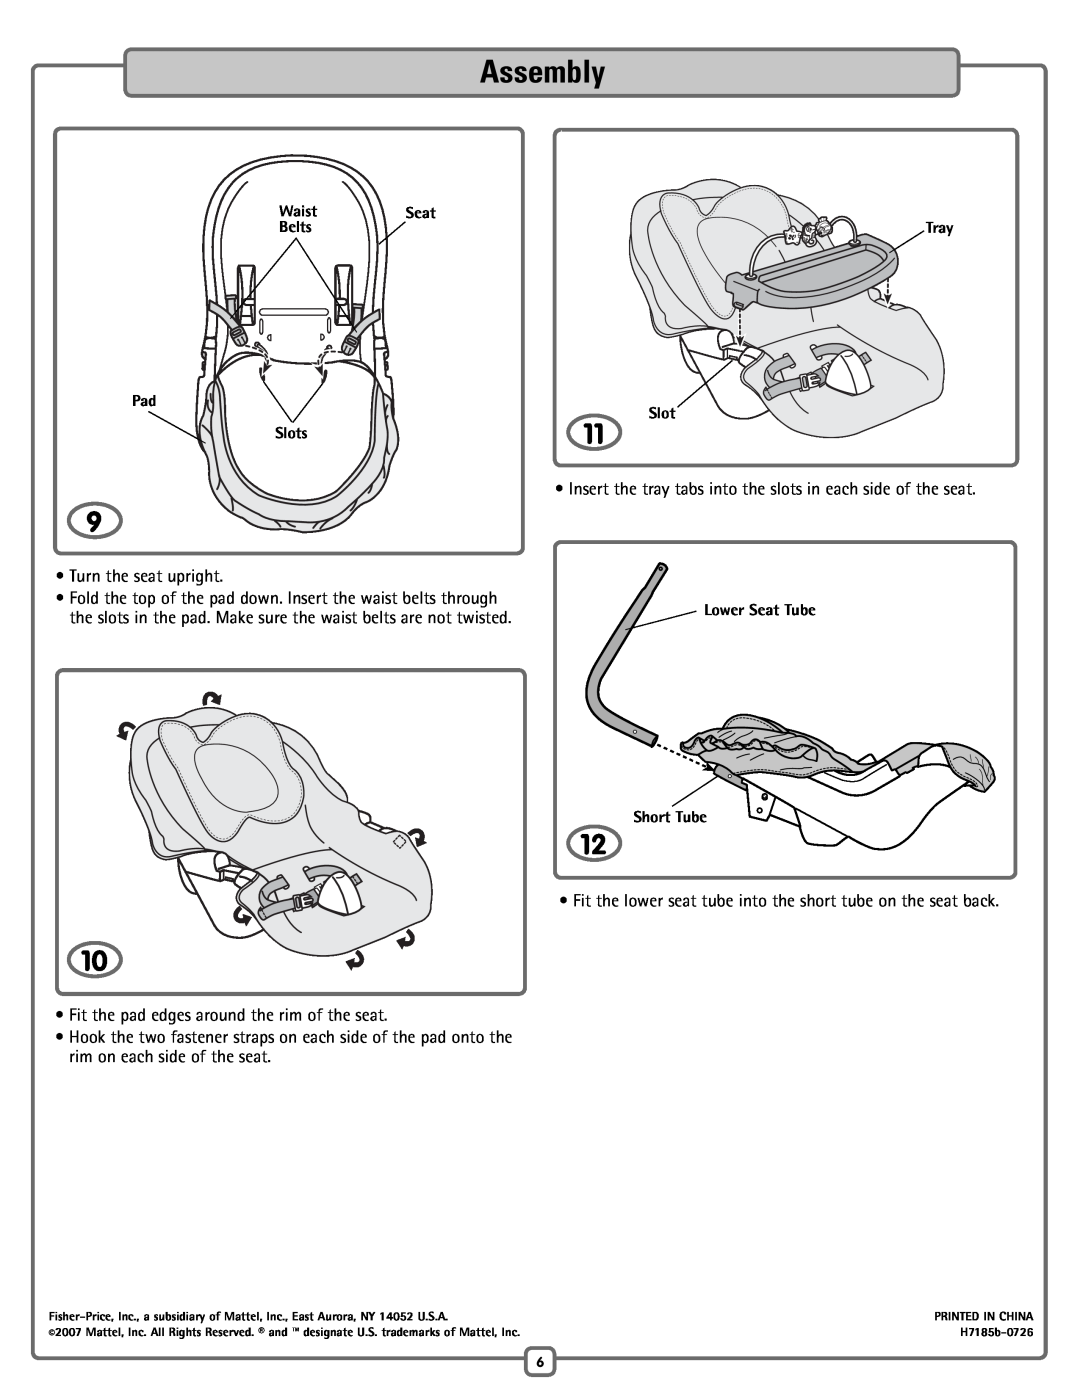 Fisher-Price H7185 manual Assembly, Turn the seat upright 